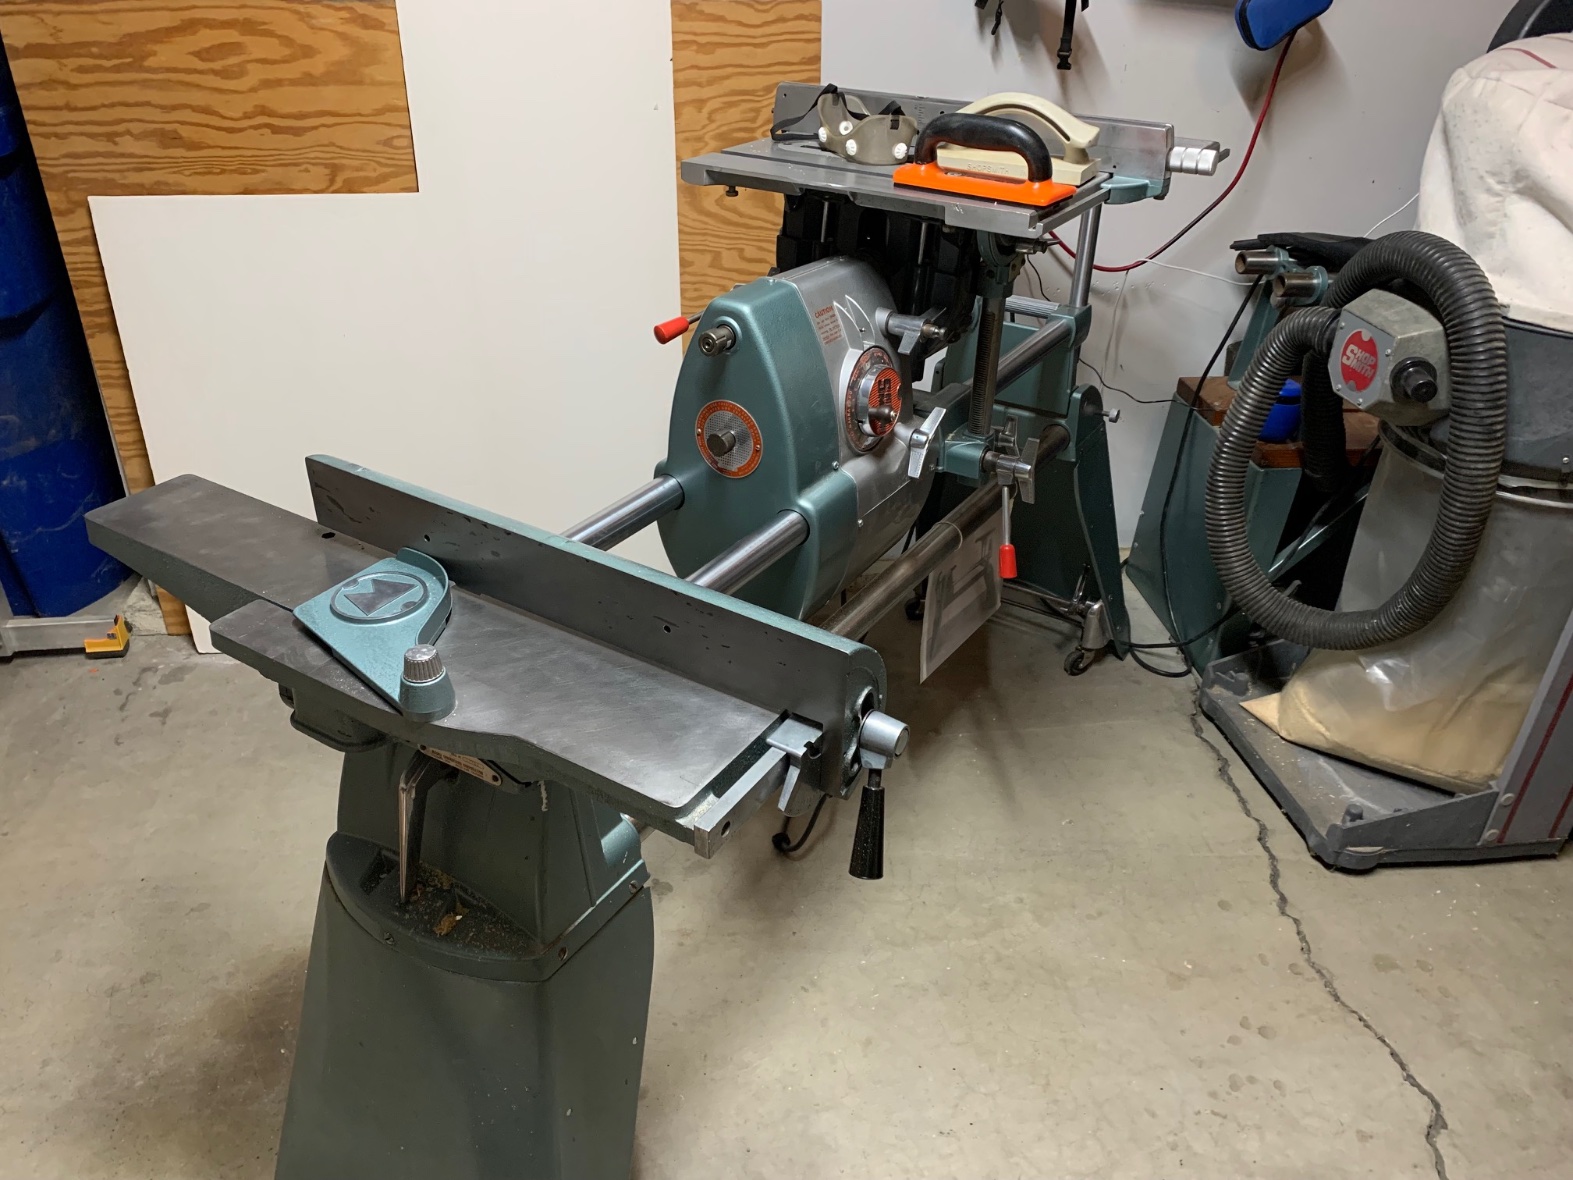 Fully refurbished jointer ready for action.